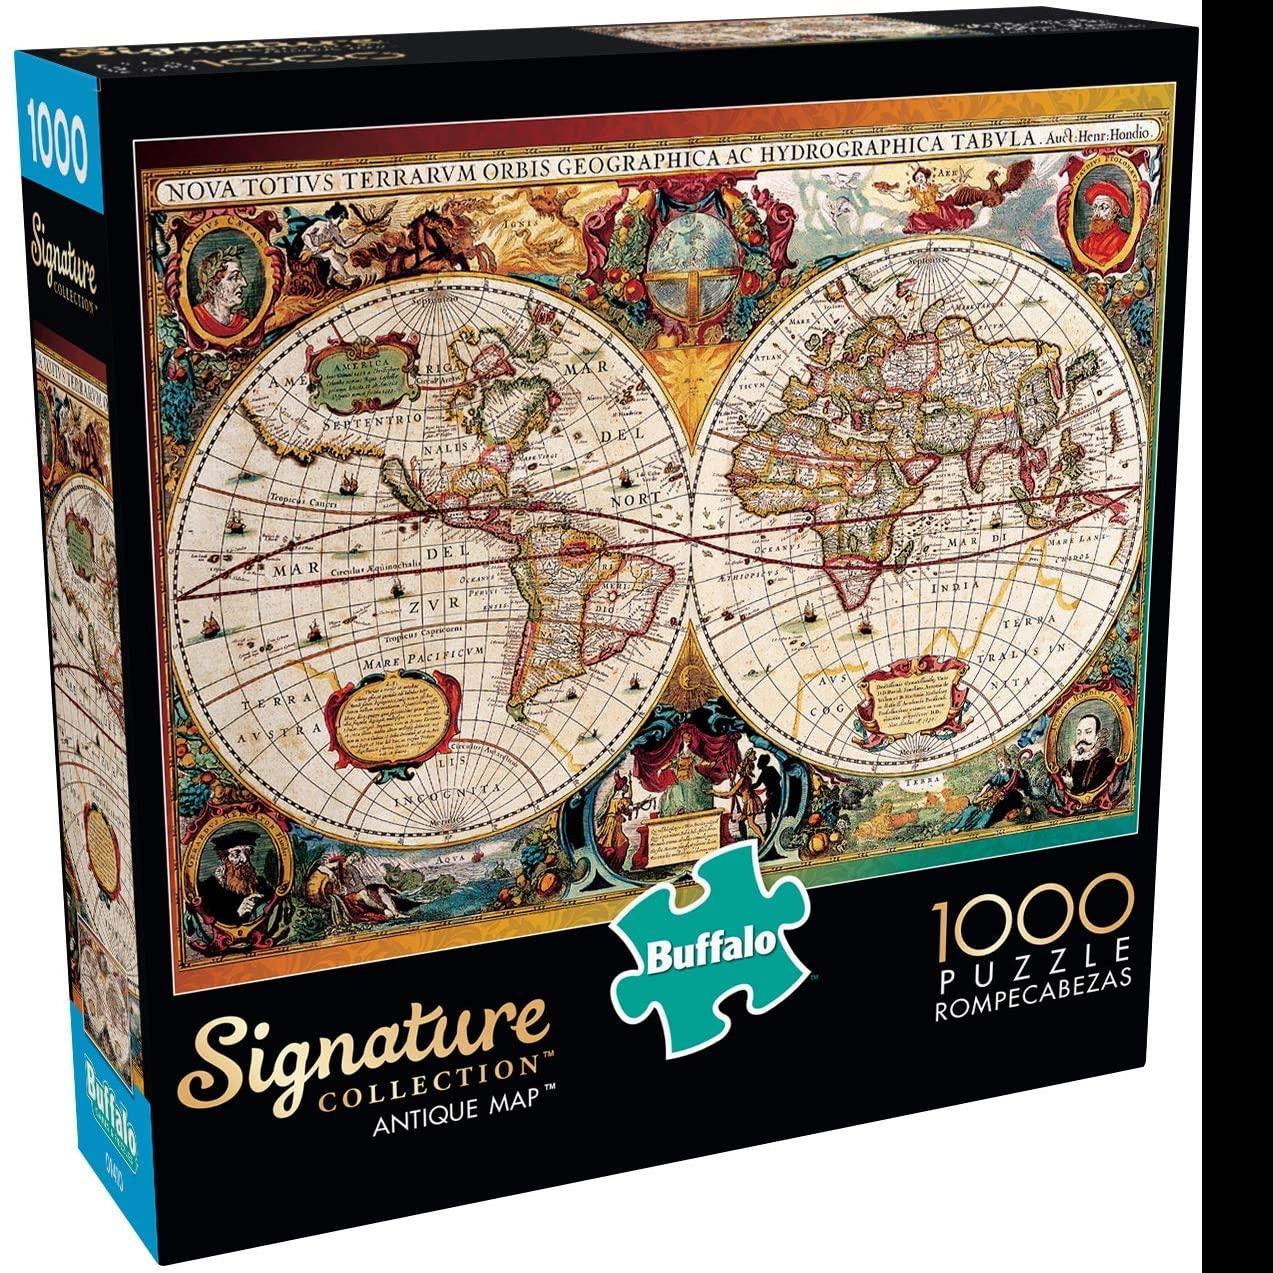 Antique Map 1000 Piece Jigsaw Puzzle for $7.18